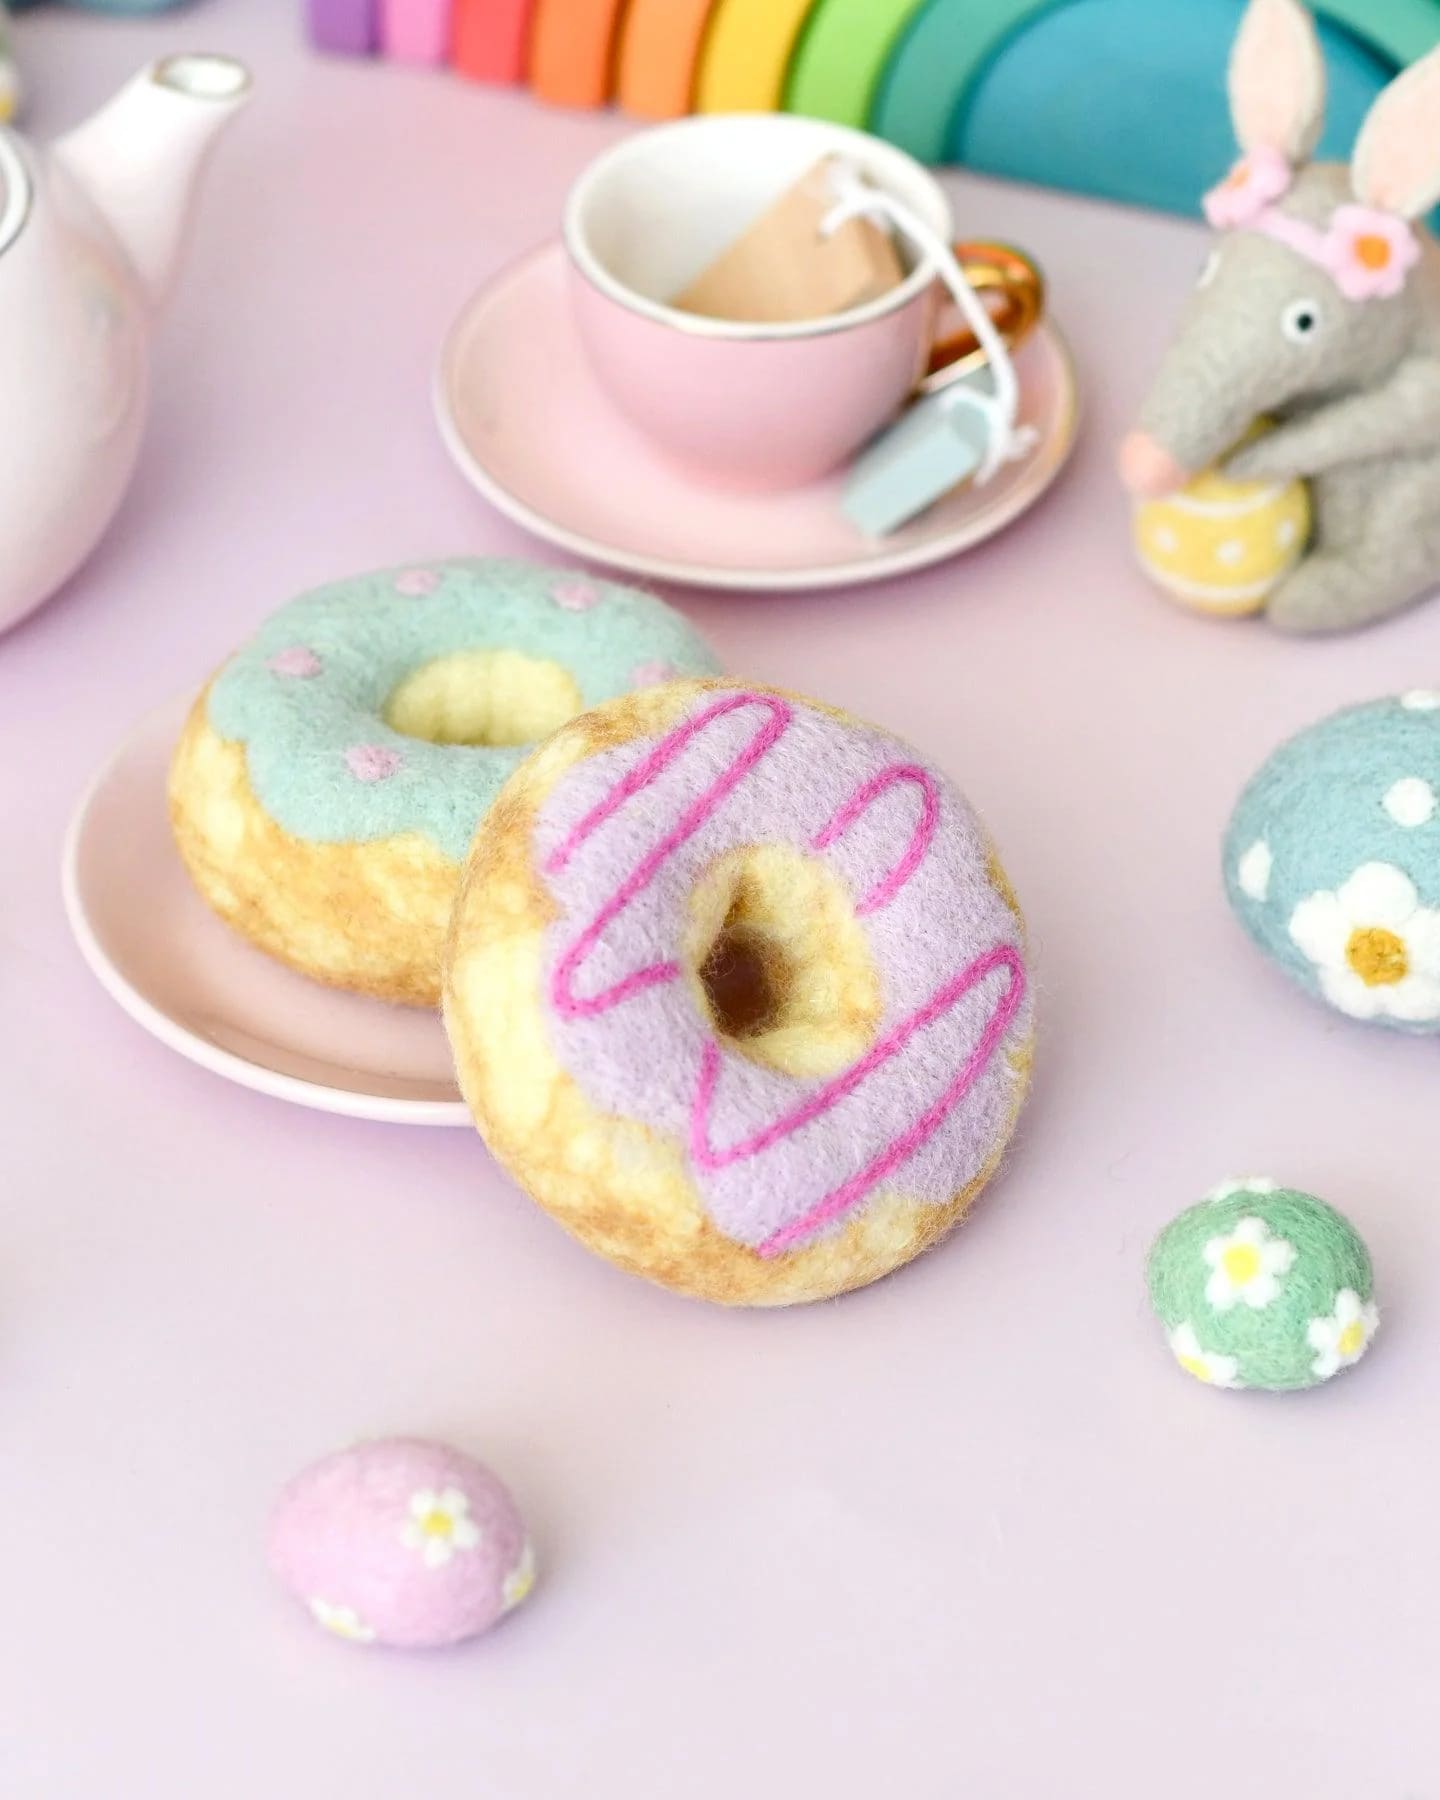 Tara Treasures Felt Doughnut (Donut) with Pastel Frosting and Pink Drizzle